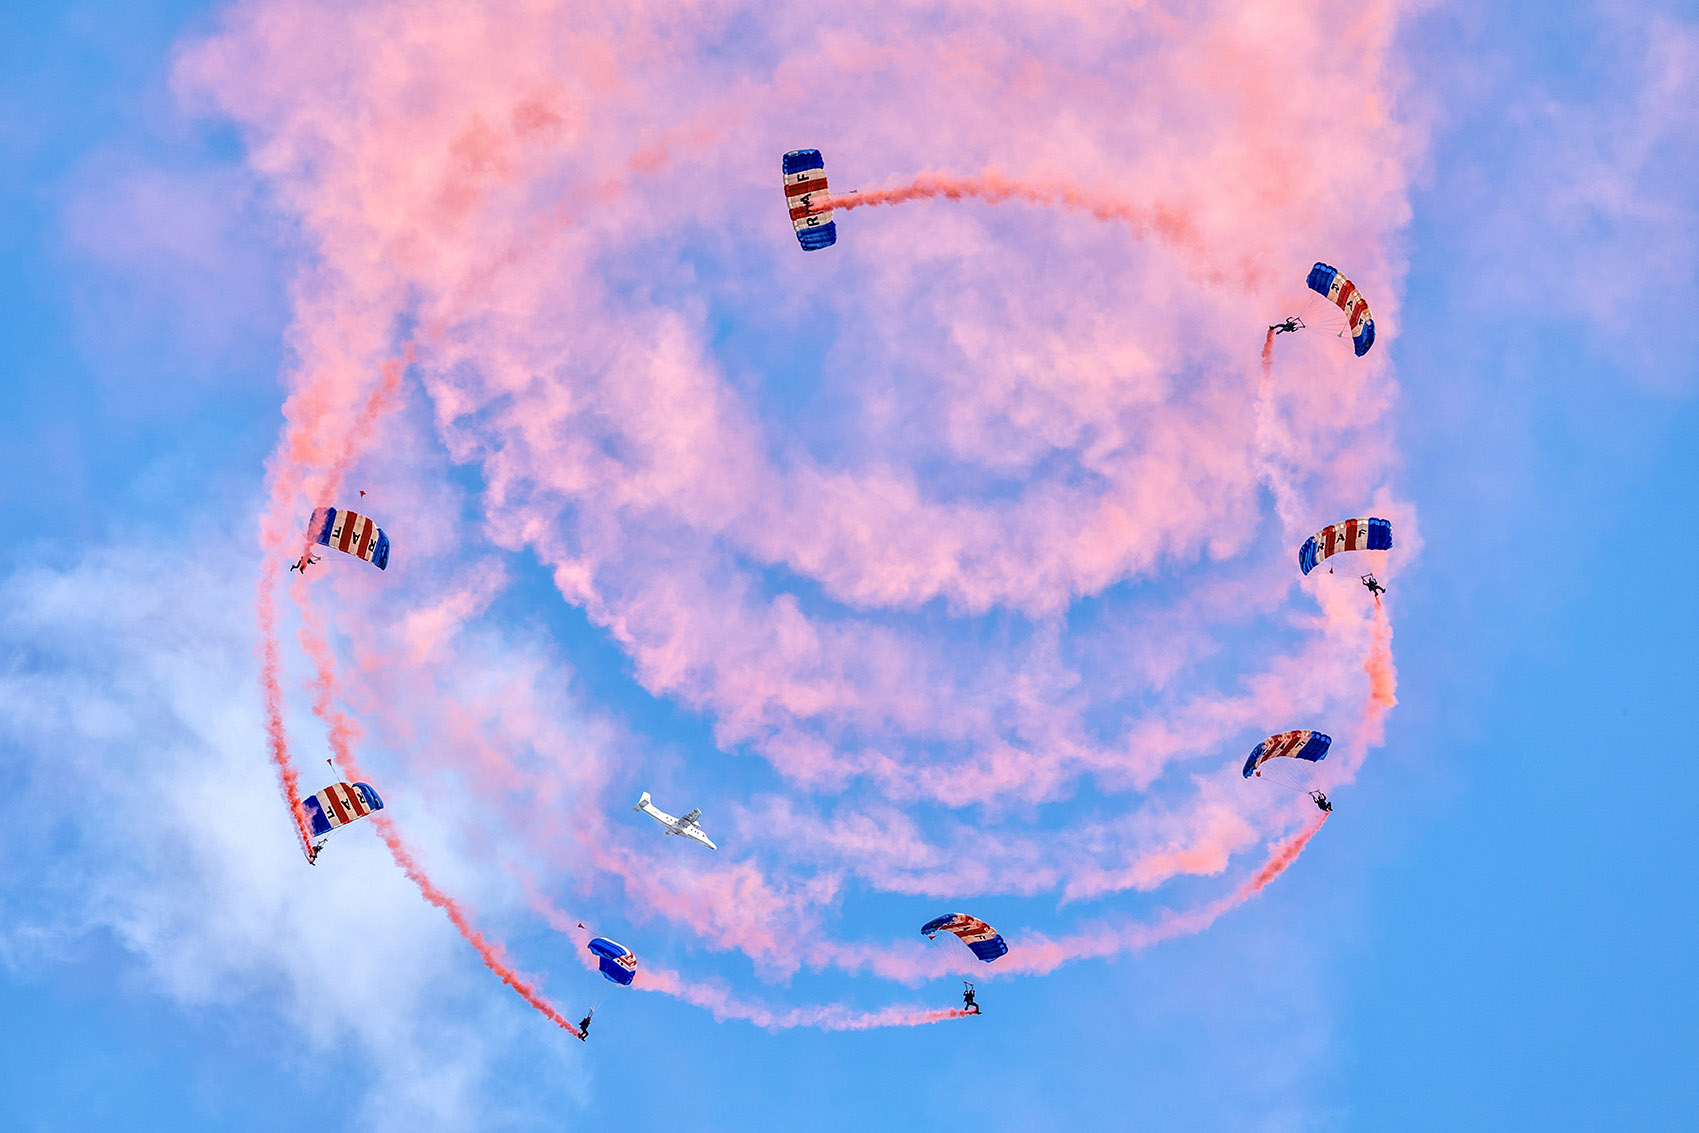 Image shows RAF Falcons Display team parachuting in a spiral, with red smoke trails.